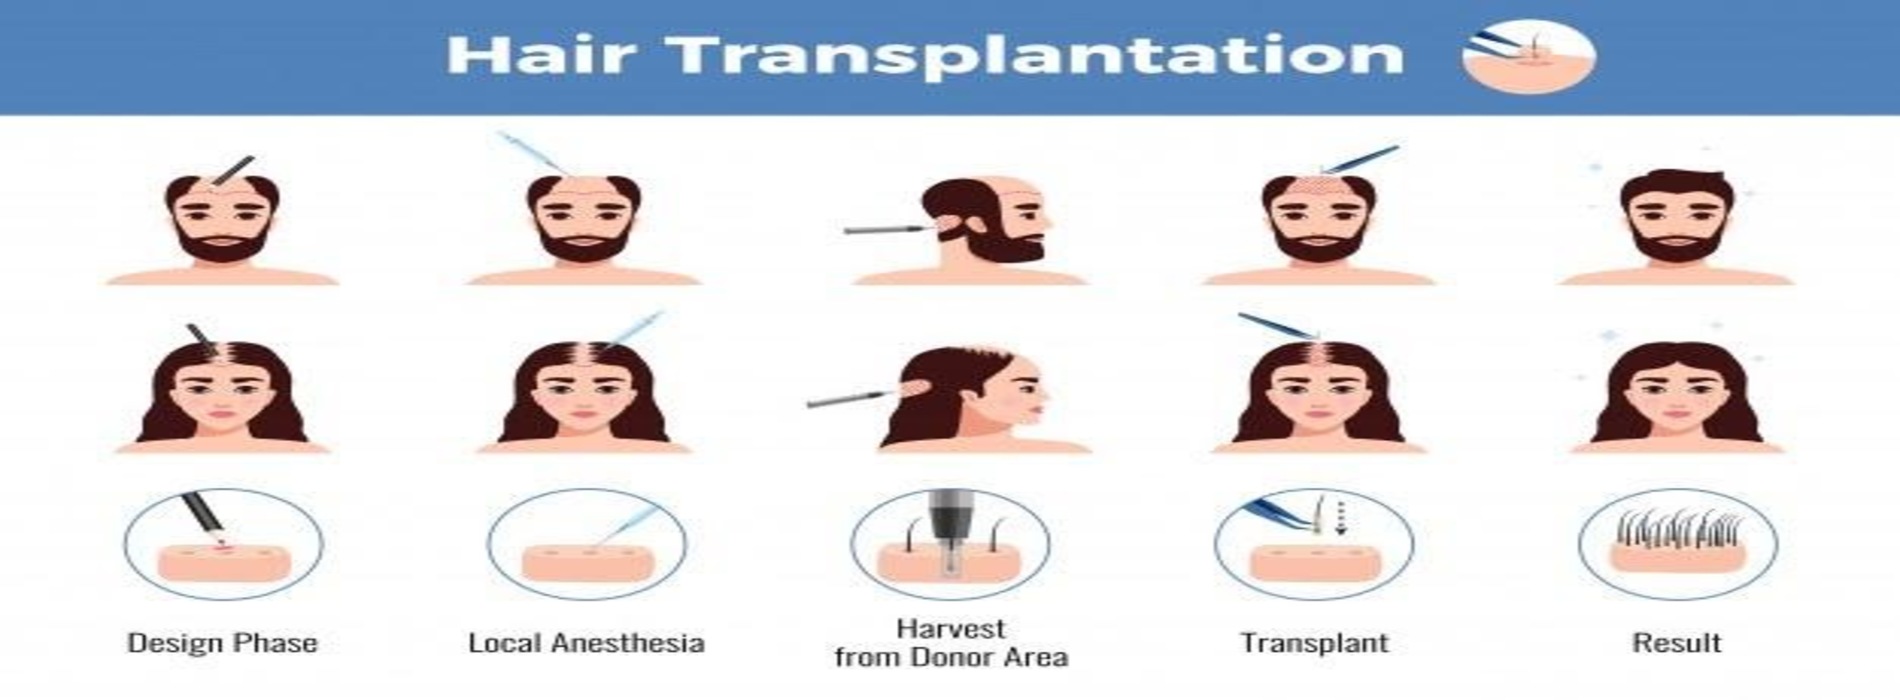 How Much Does Hair Transplant Cost in Hyderabad